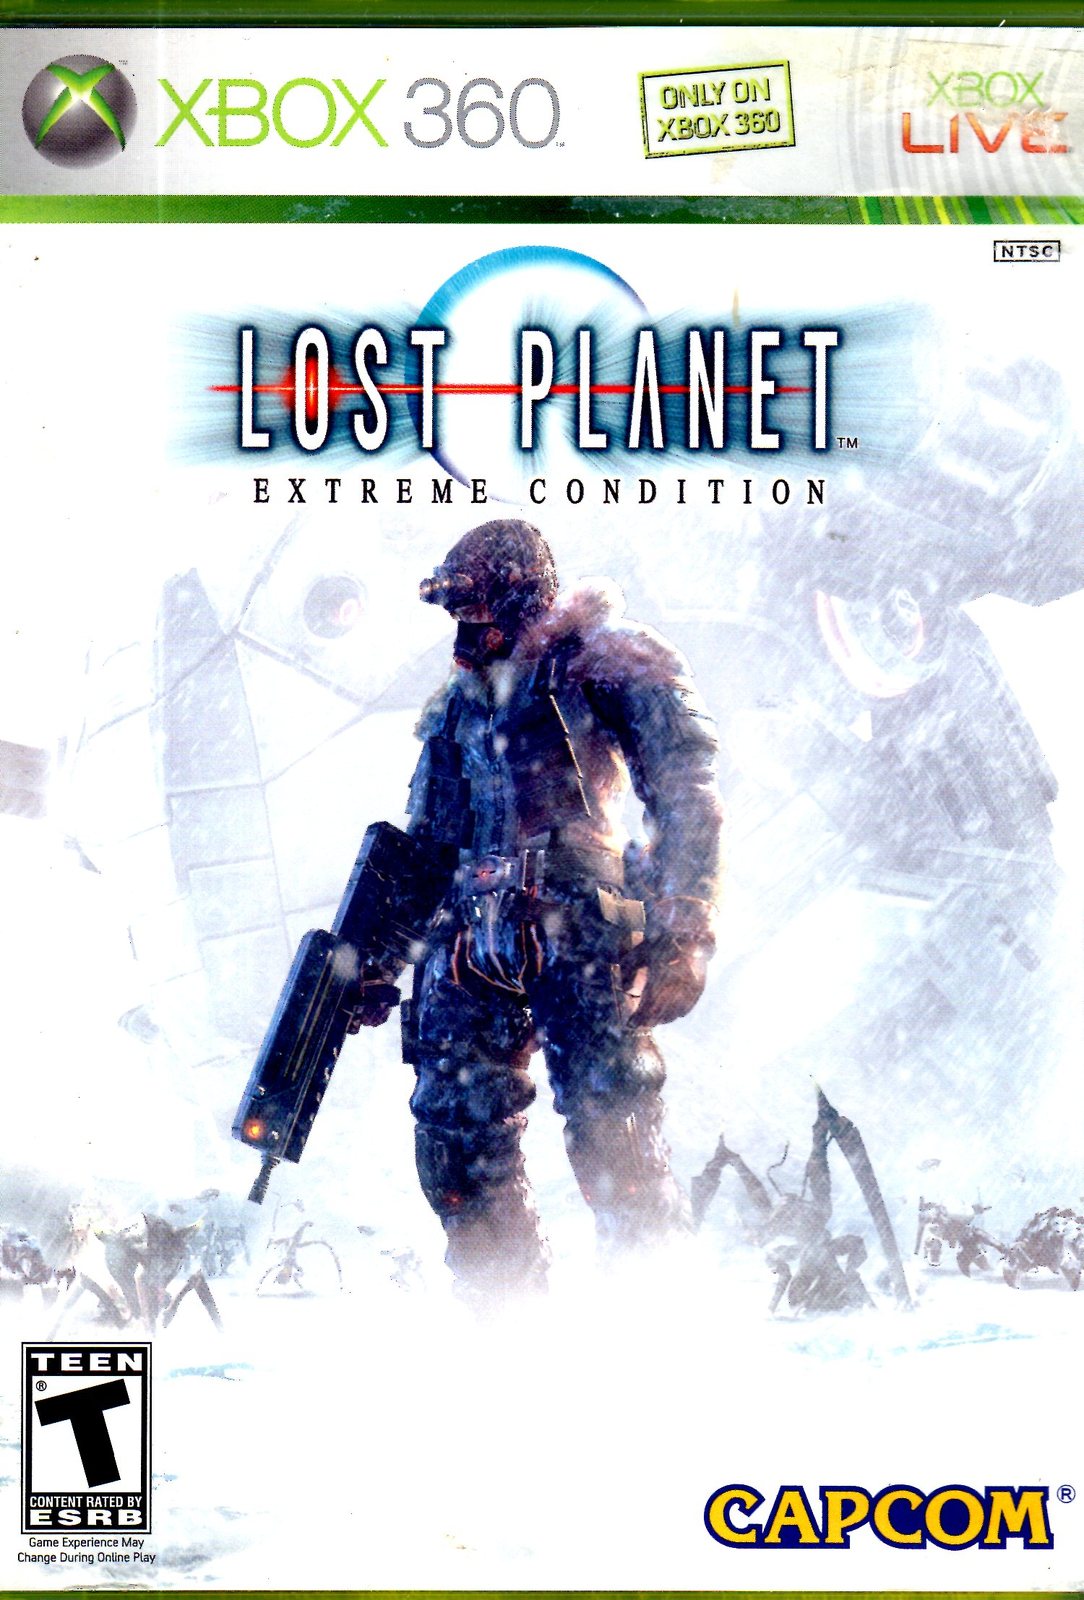 XBox 360 -Lost Planet (Extreme Condition) - $7.00